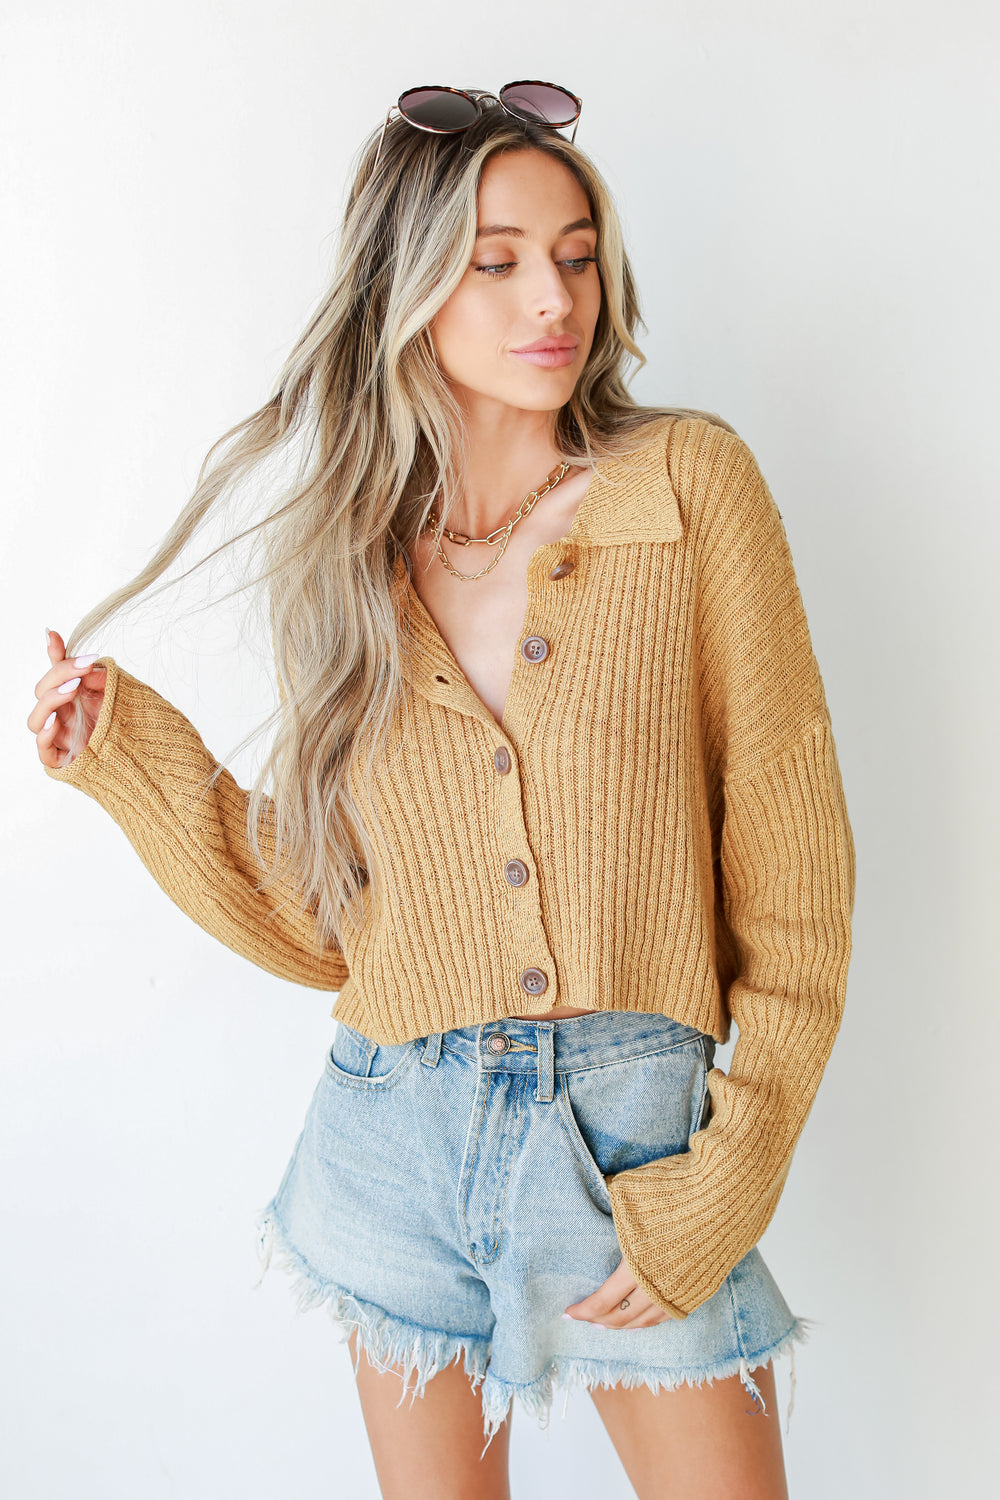 Cropped Sweater from dress up